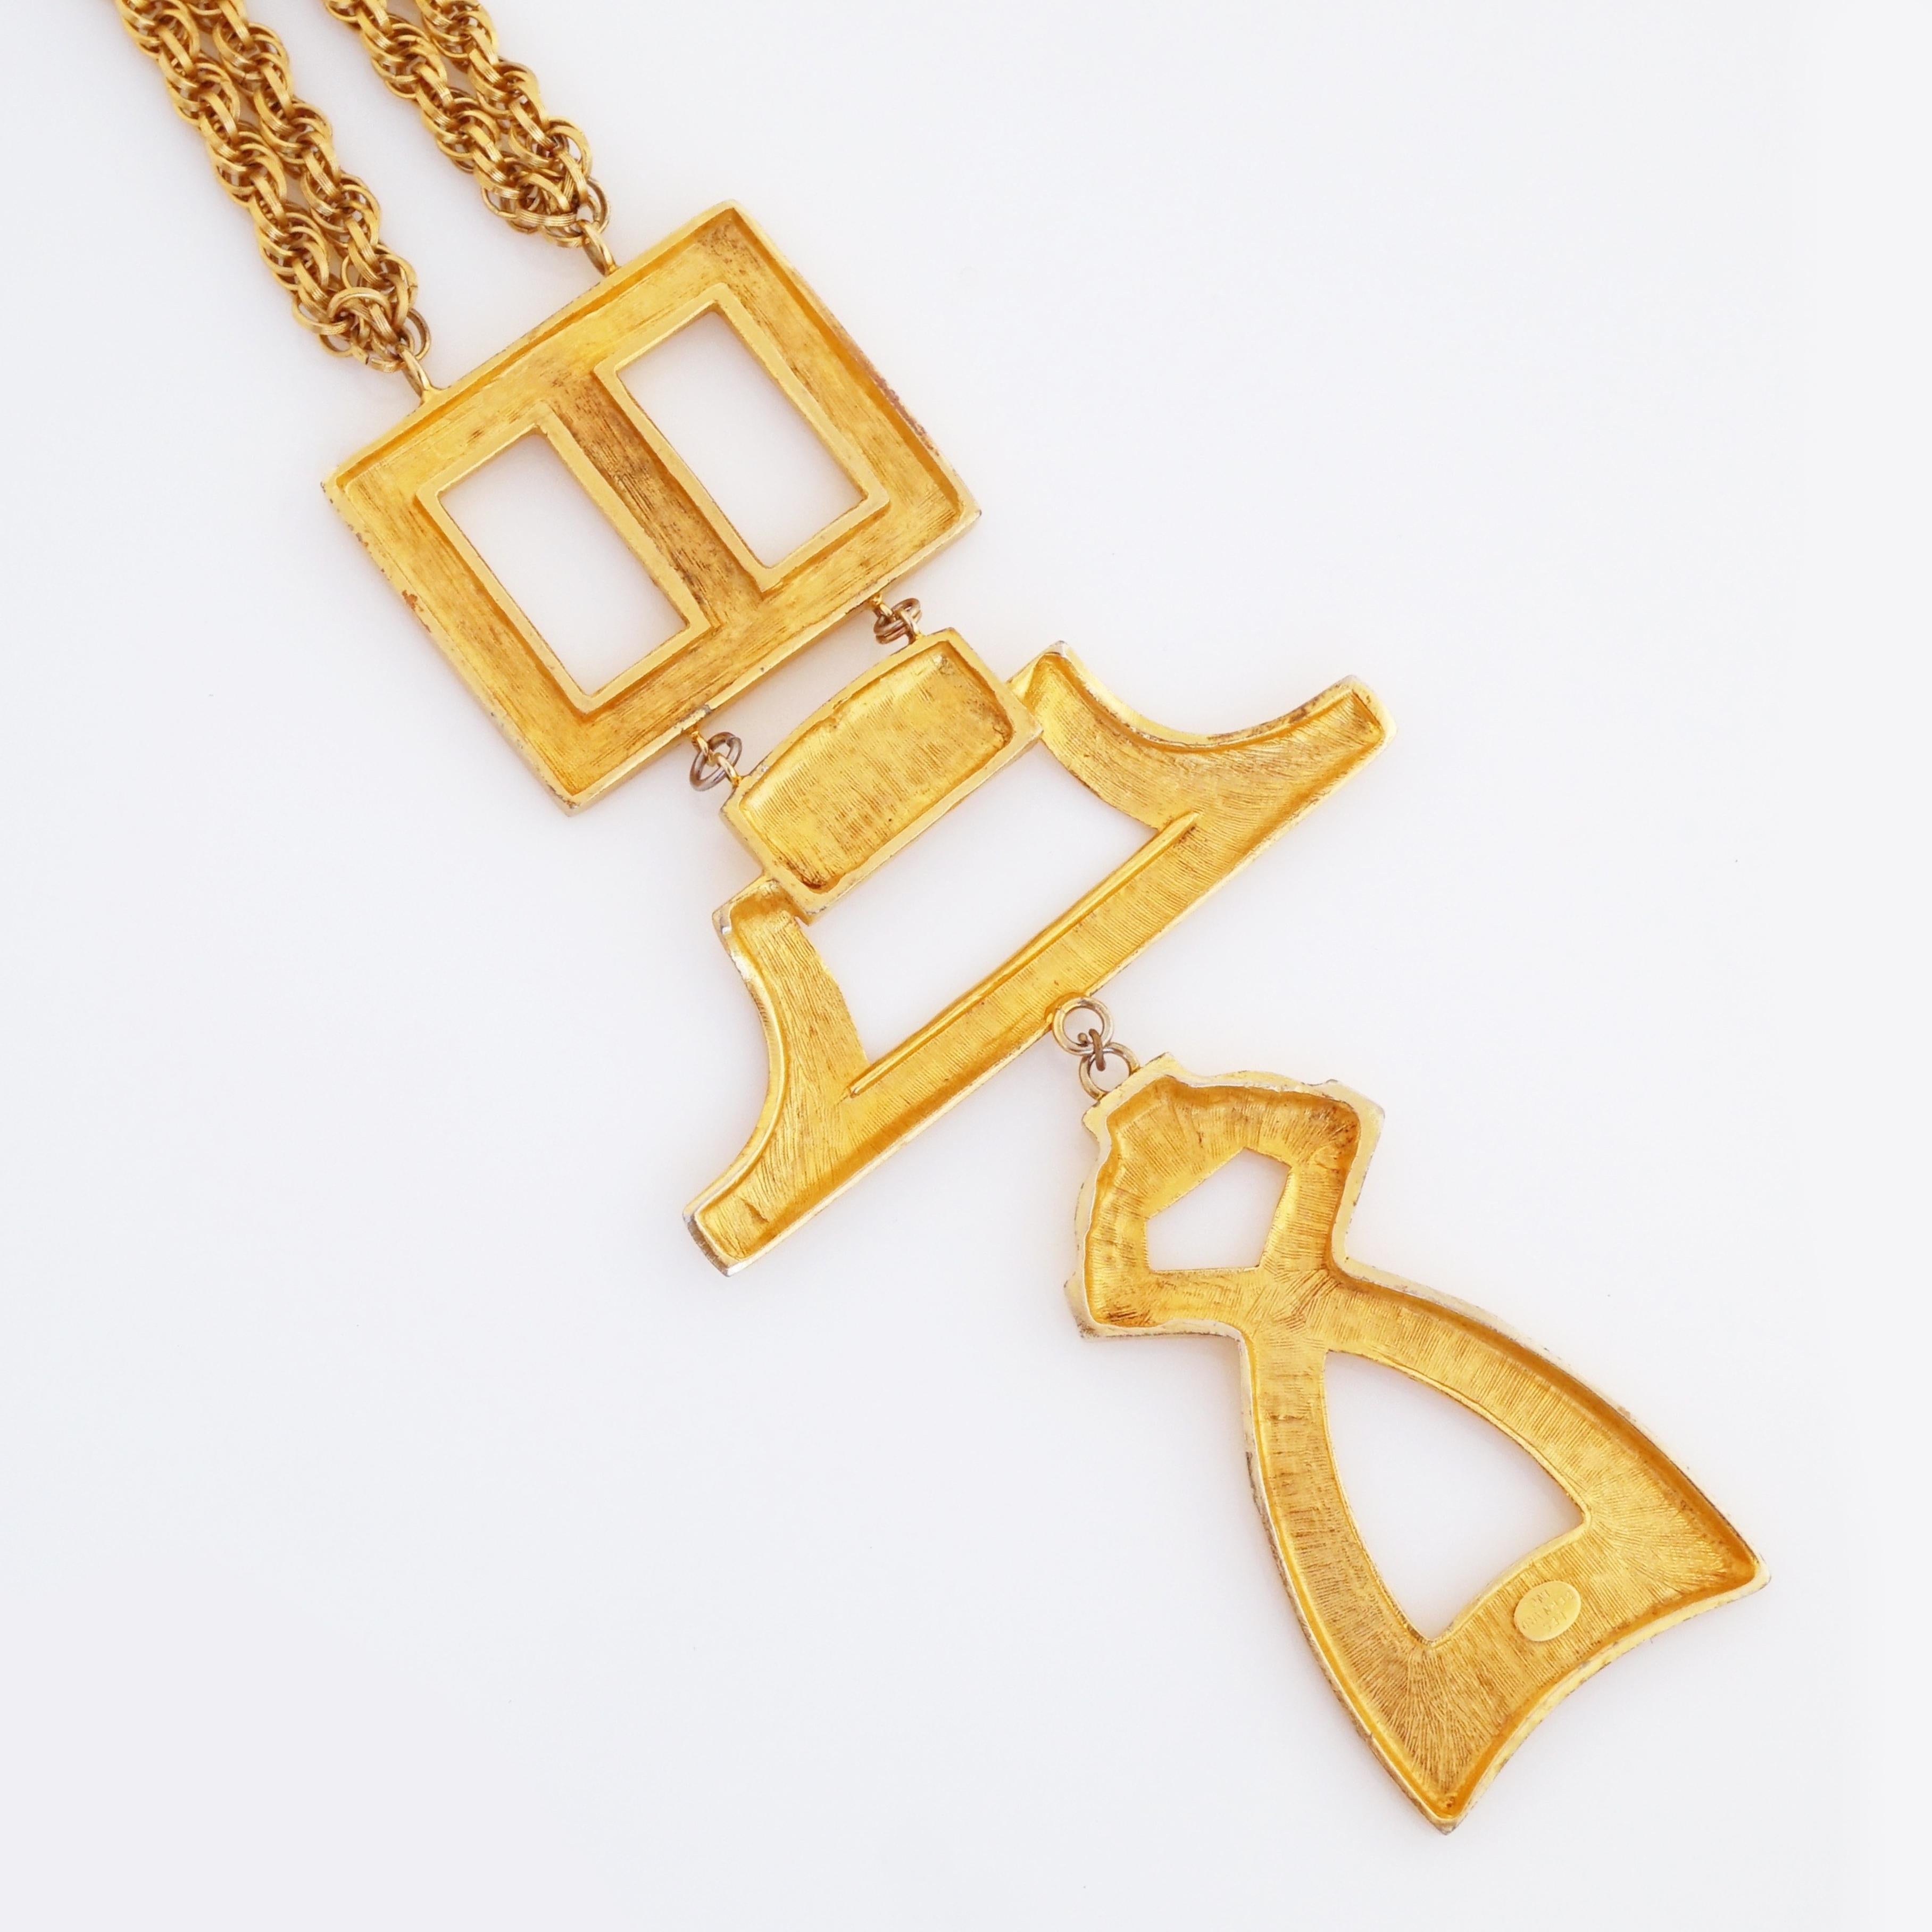 Massive Runway Gilt Modernist Character Statement Necklace By Les Bernard, 1980s In Good Condition For Sale In McKinney, TX